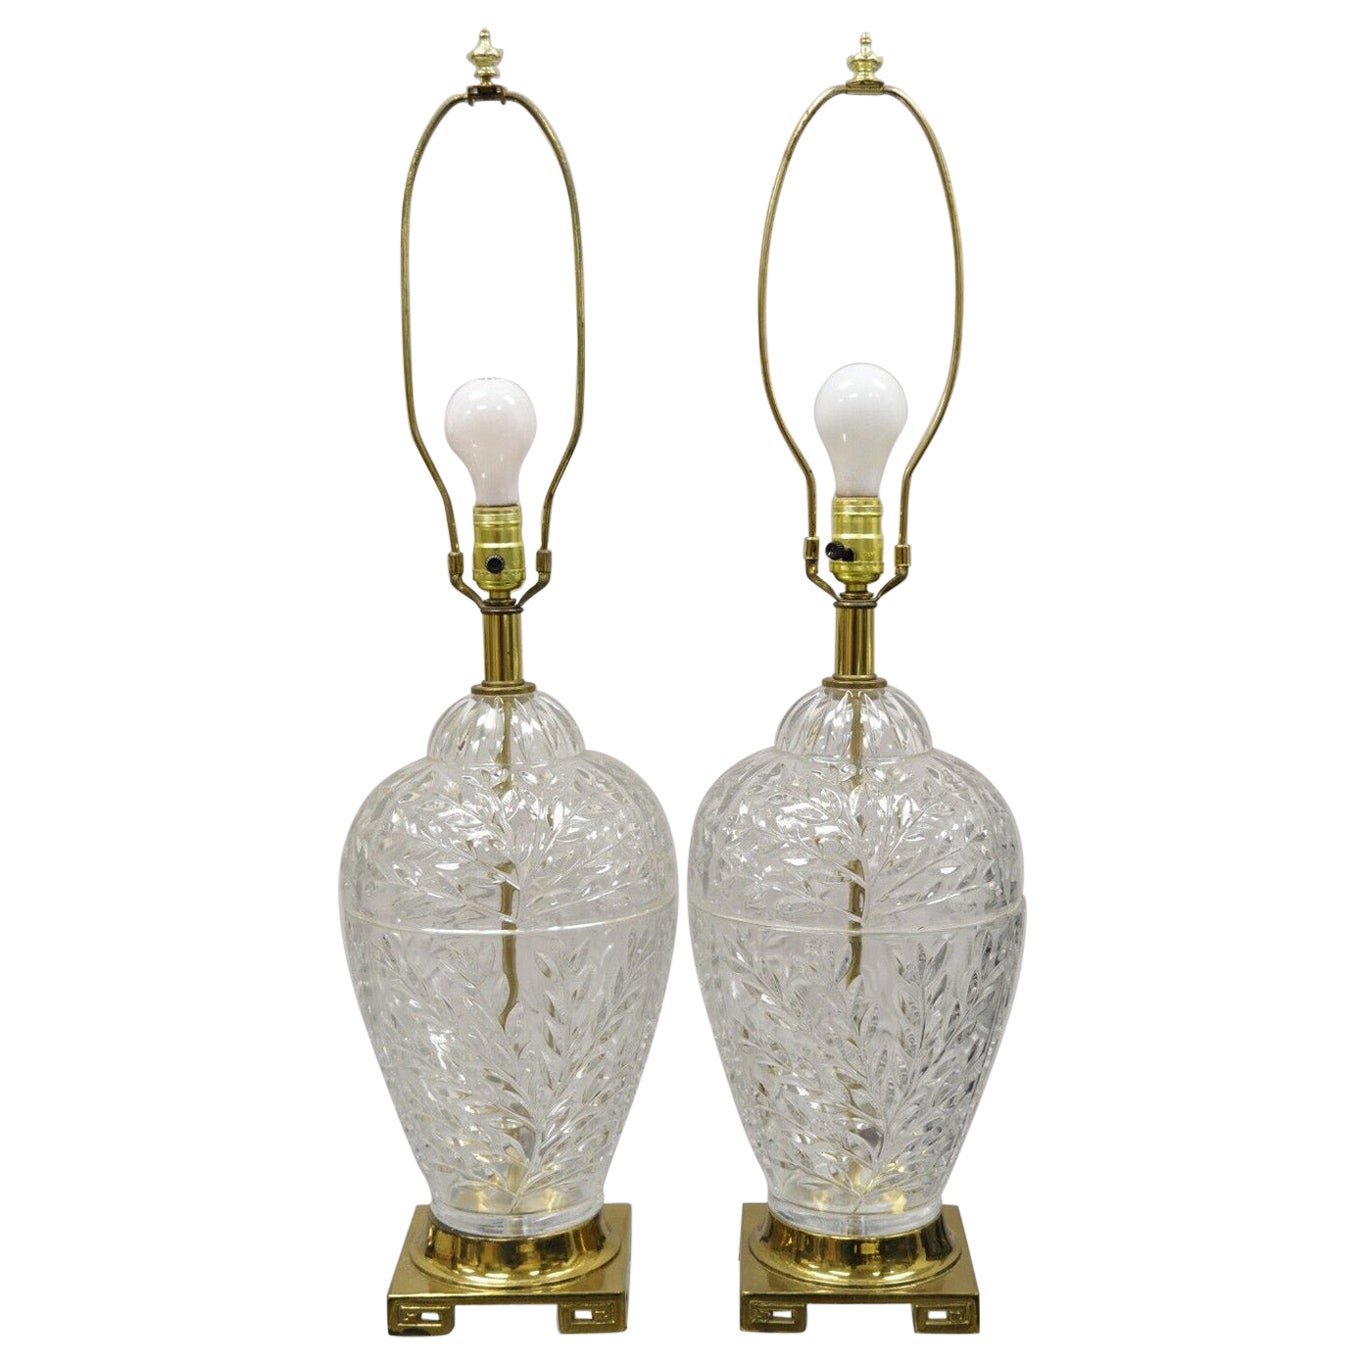 Pair Vtg French Style Cut Crystal Glass Bulbous Table Lamps Brass Greek Key Base